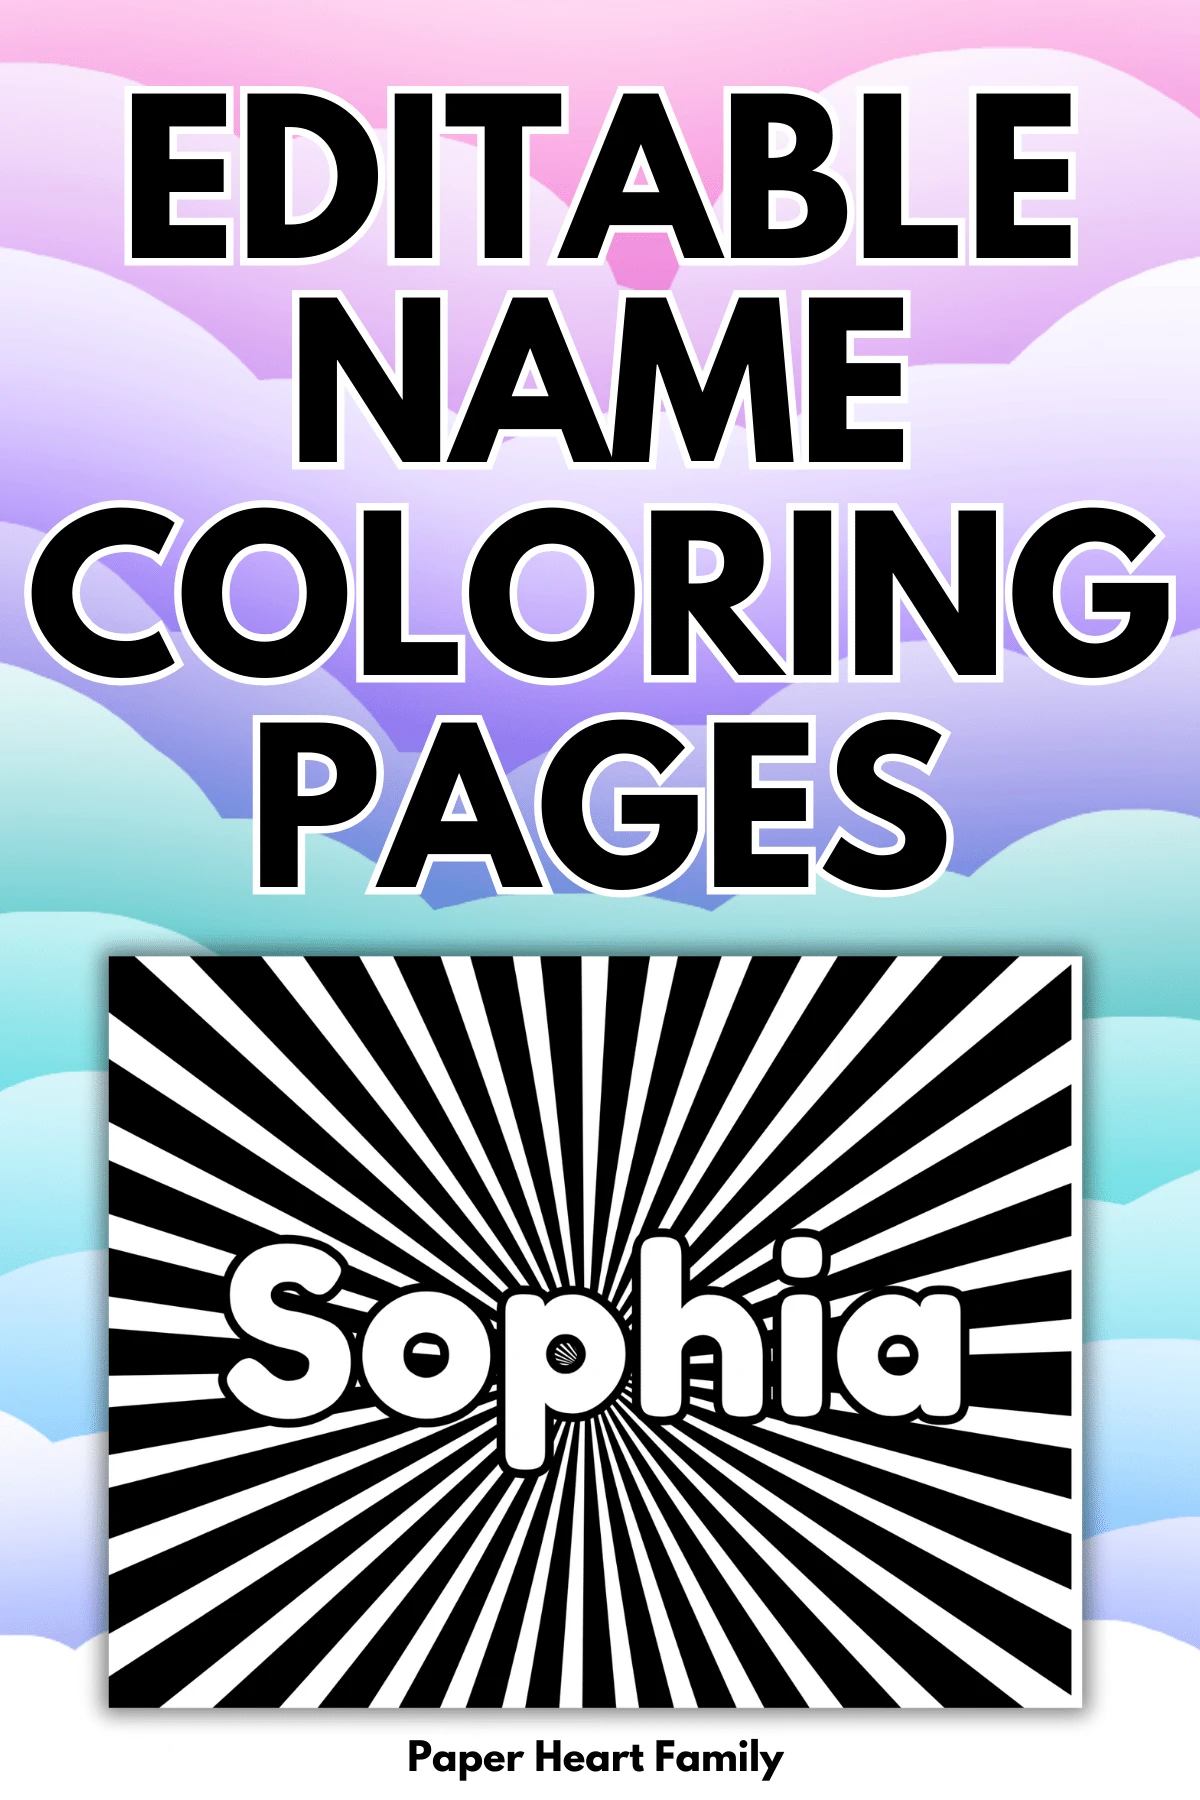 Sophia coloring page with sunburst